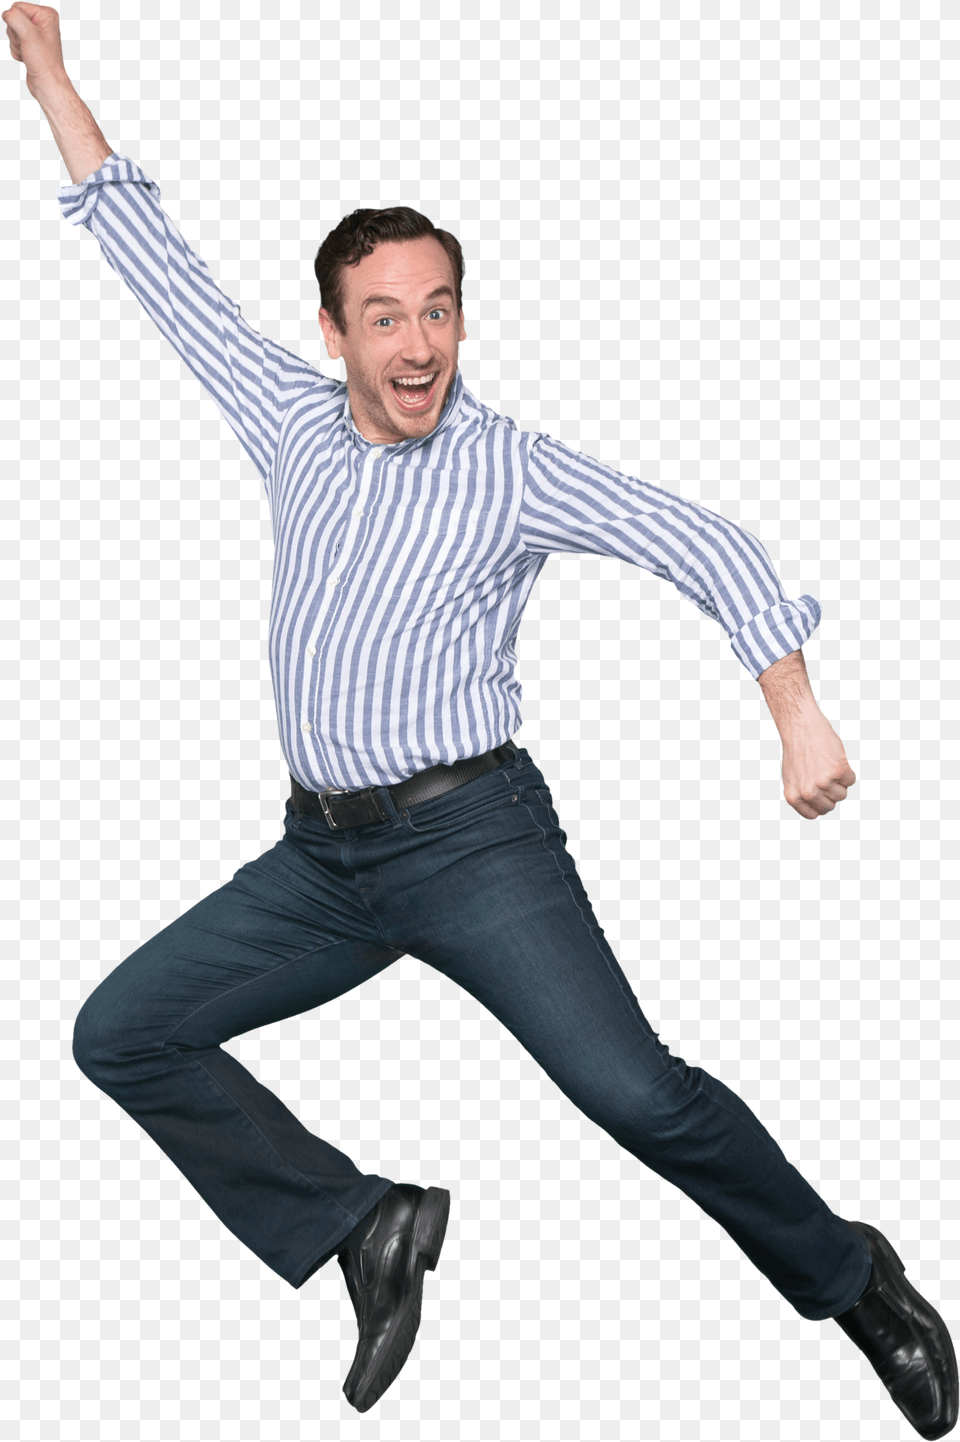 Jumping Person Robbie Eicher Jumping Vippng Smart Casual, Adult, Man, Dancing, Male Free Png Download